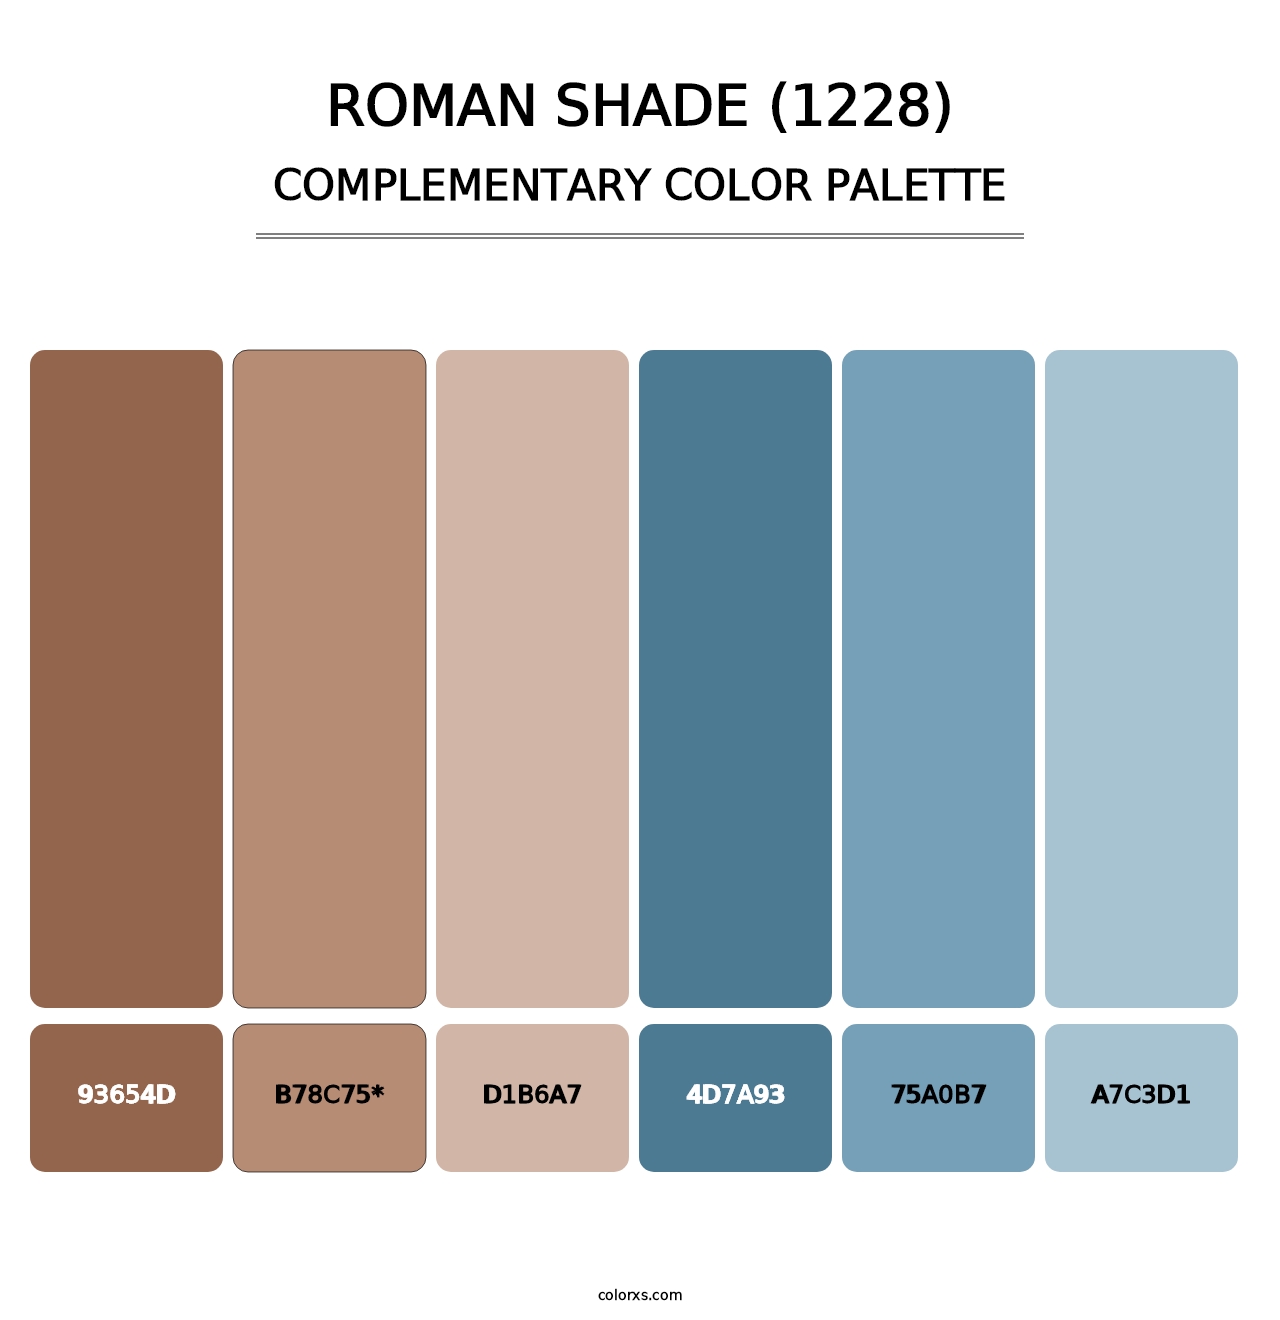 Roman Shade (1228) - Complementary Color Palette